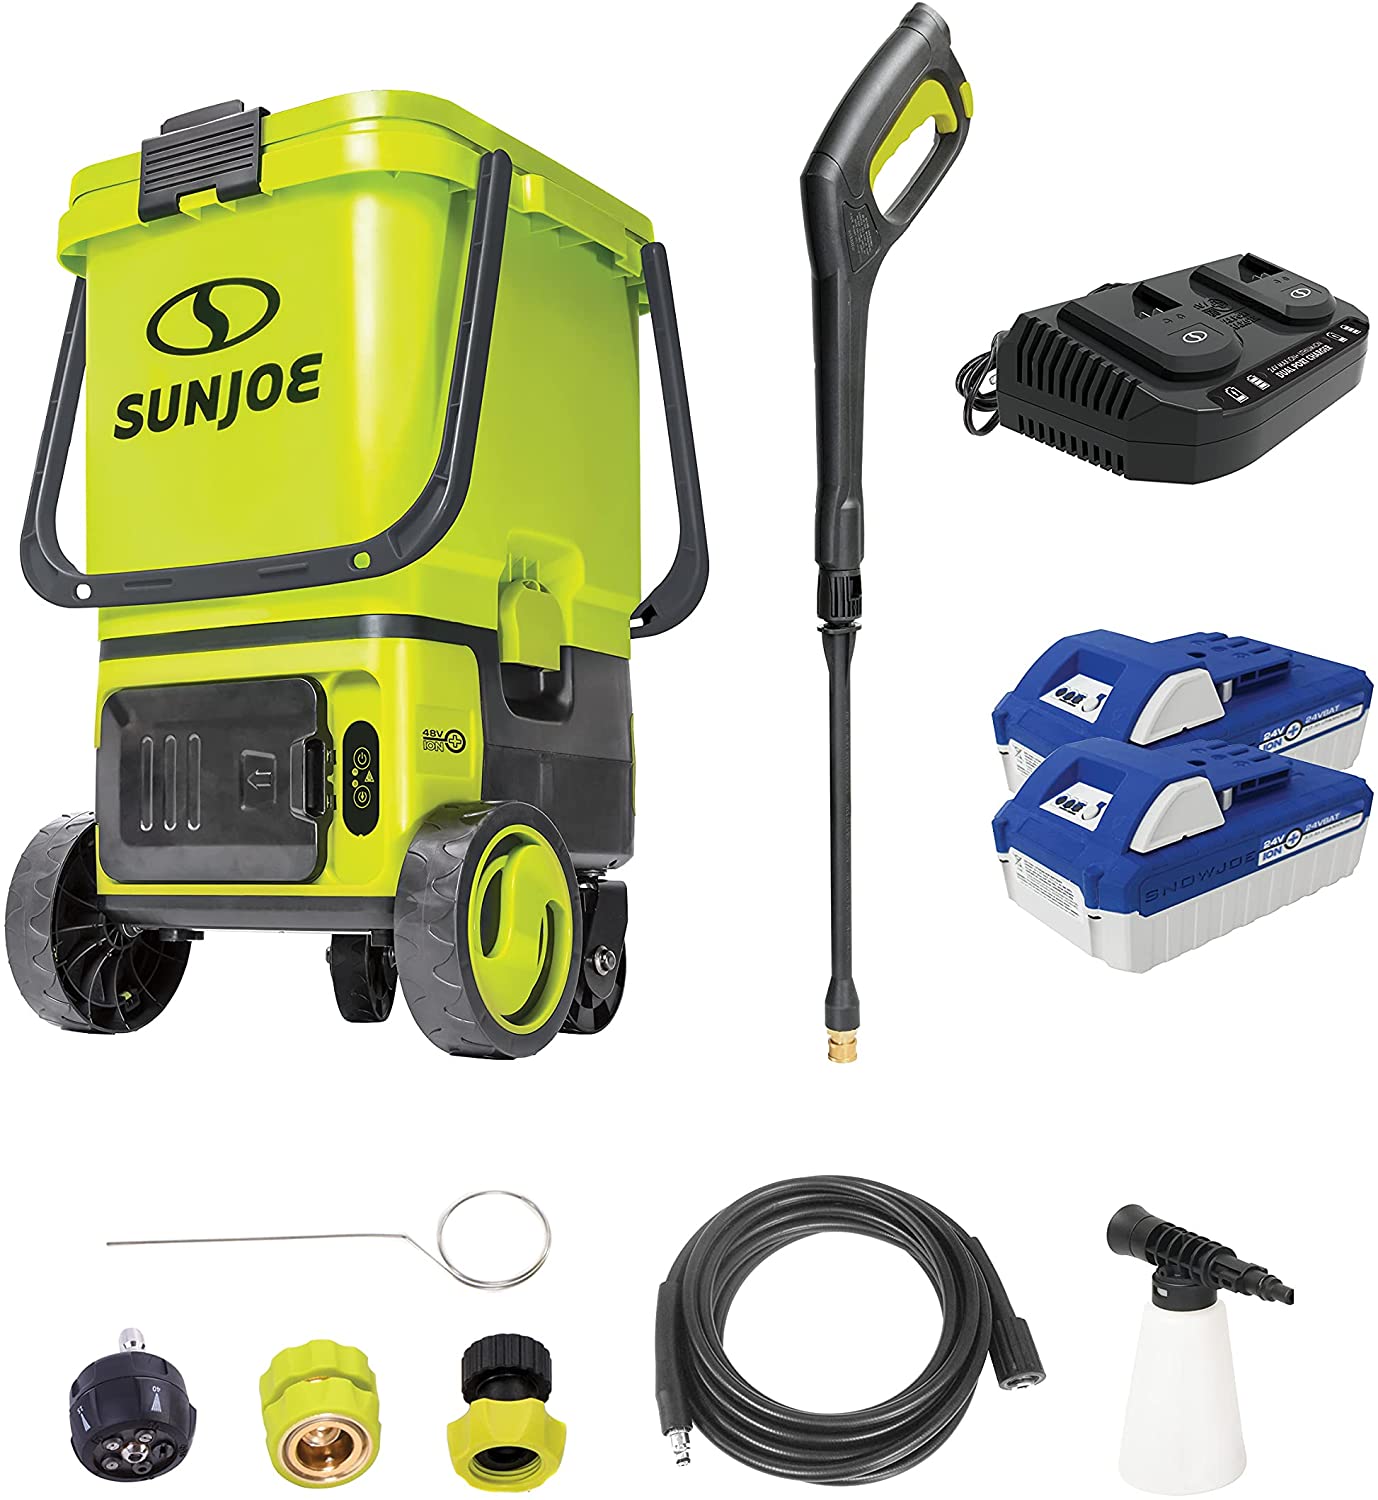 Best Cordless Pressure Washer For Portable Cleaning